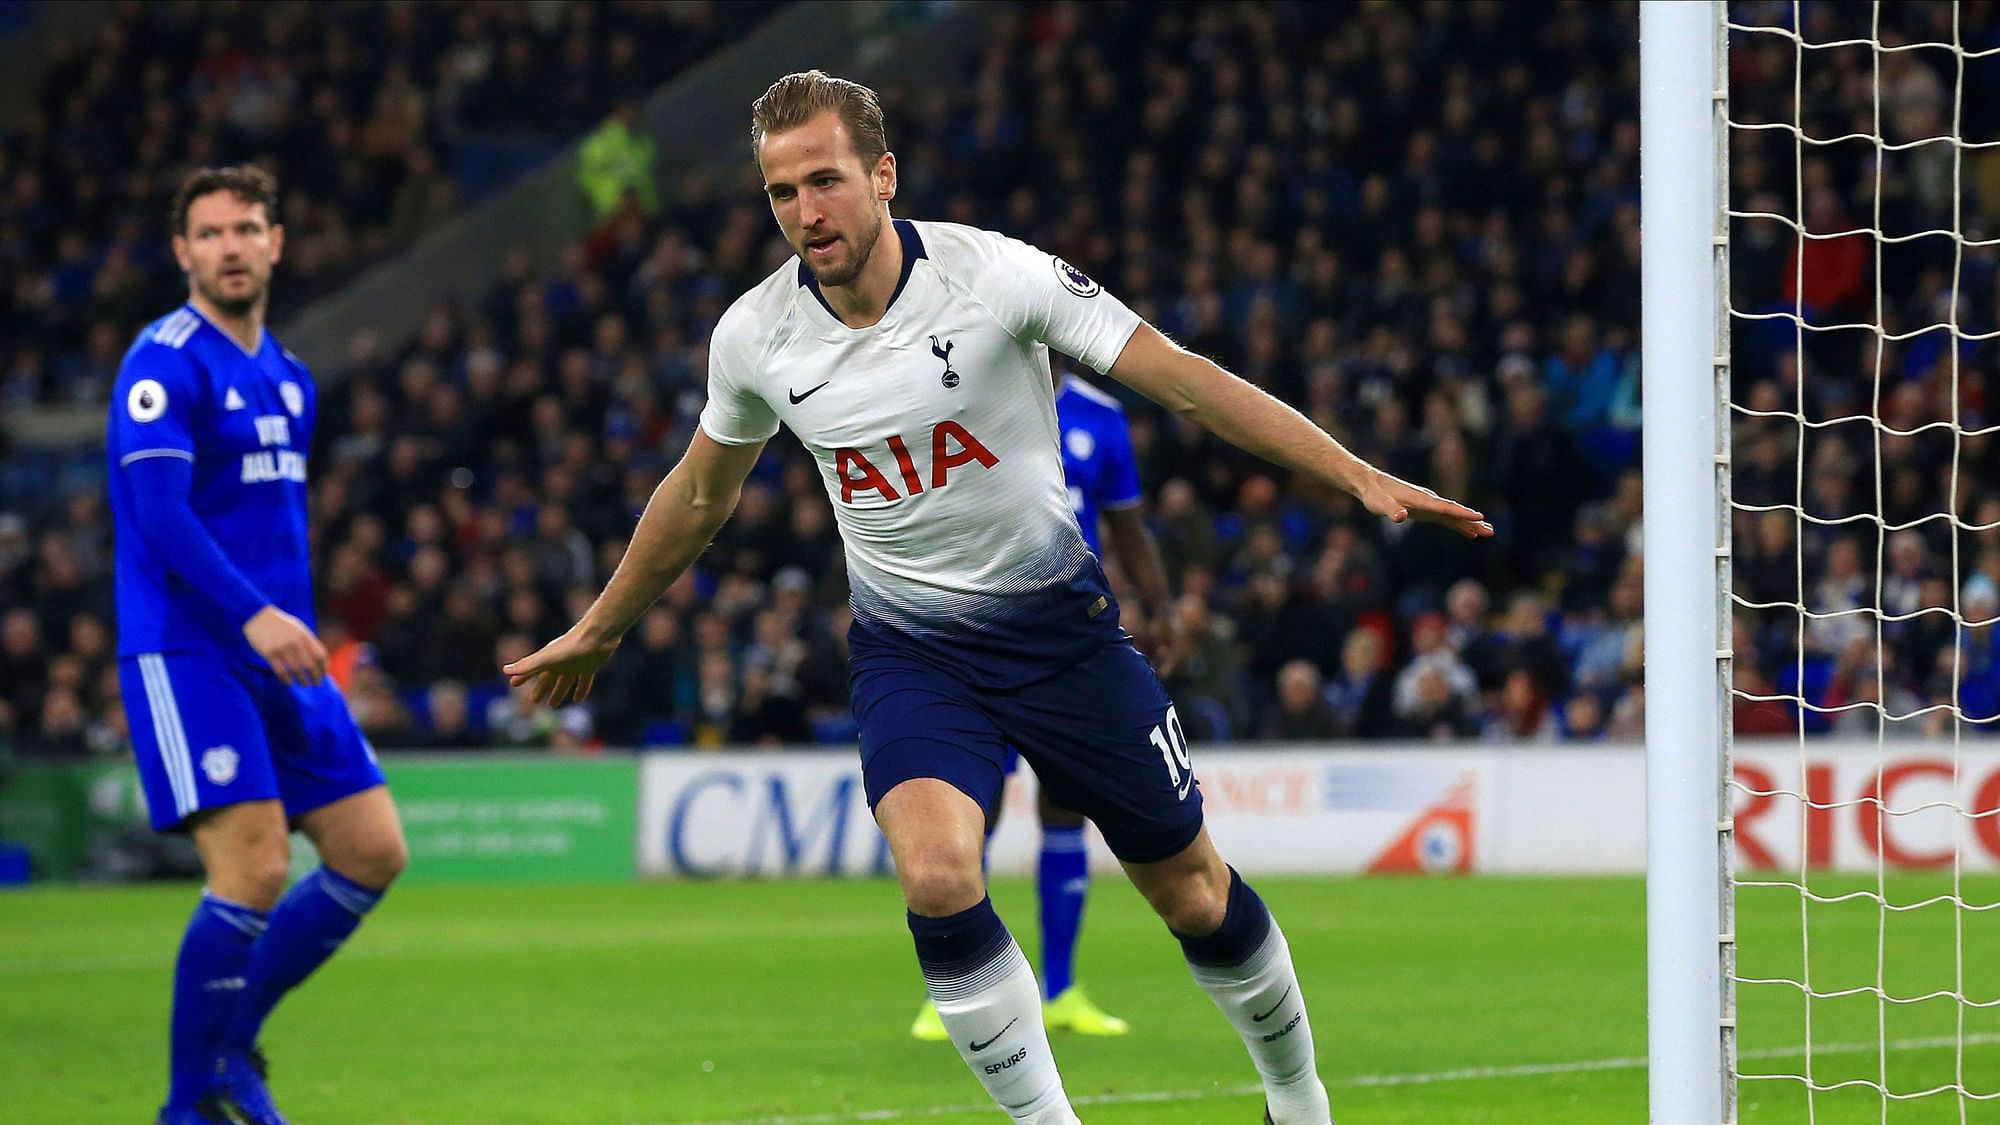 Harry Kane, the league’s leading scorer in 2015-16 and 2016-17, is tied with Aubameyang atop the charts.